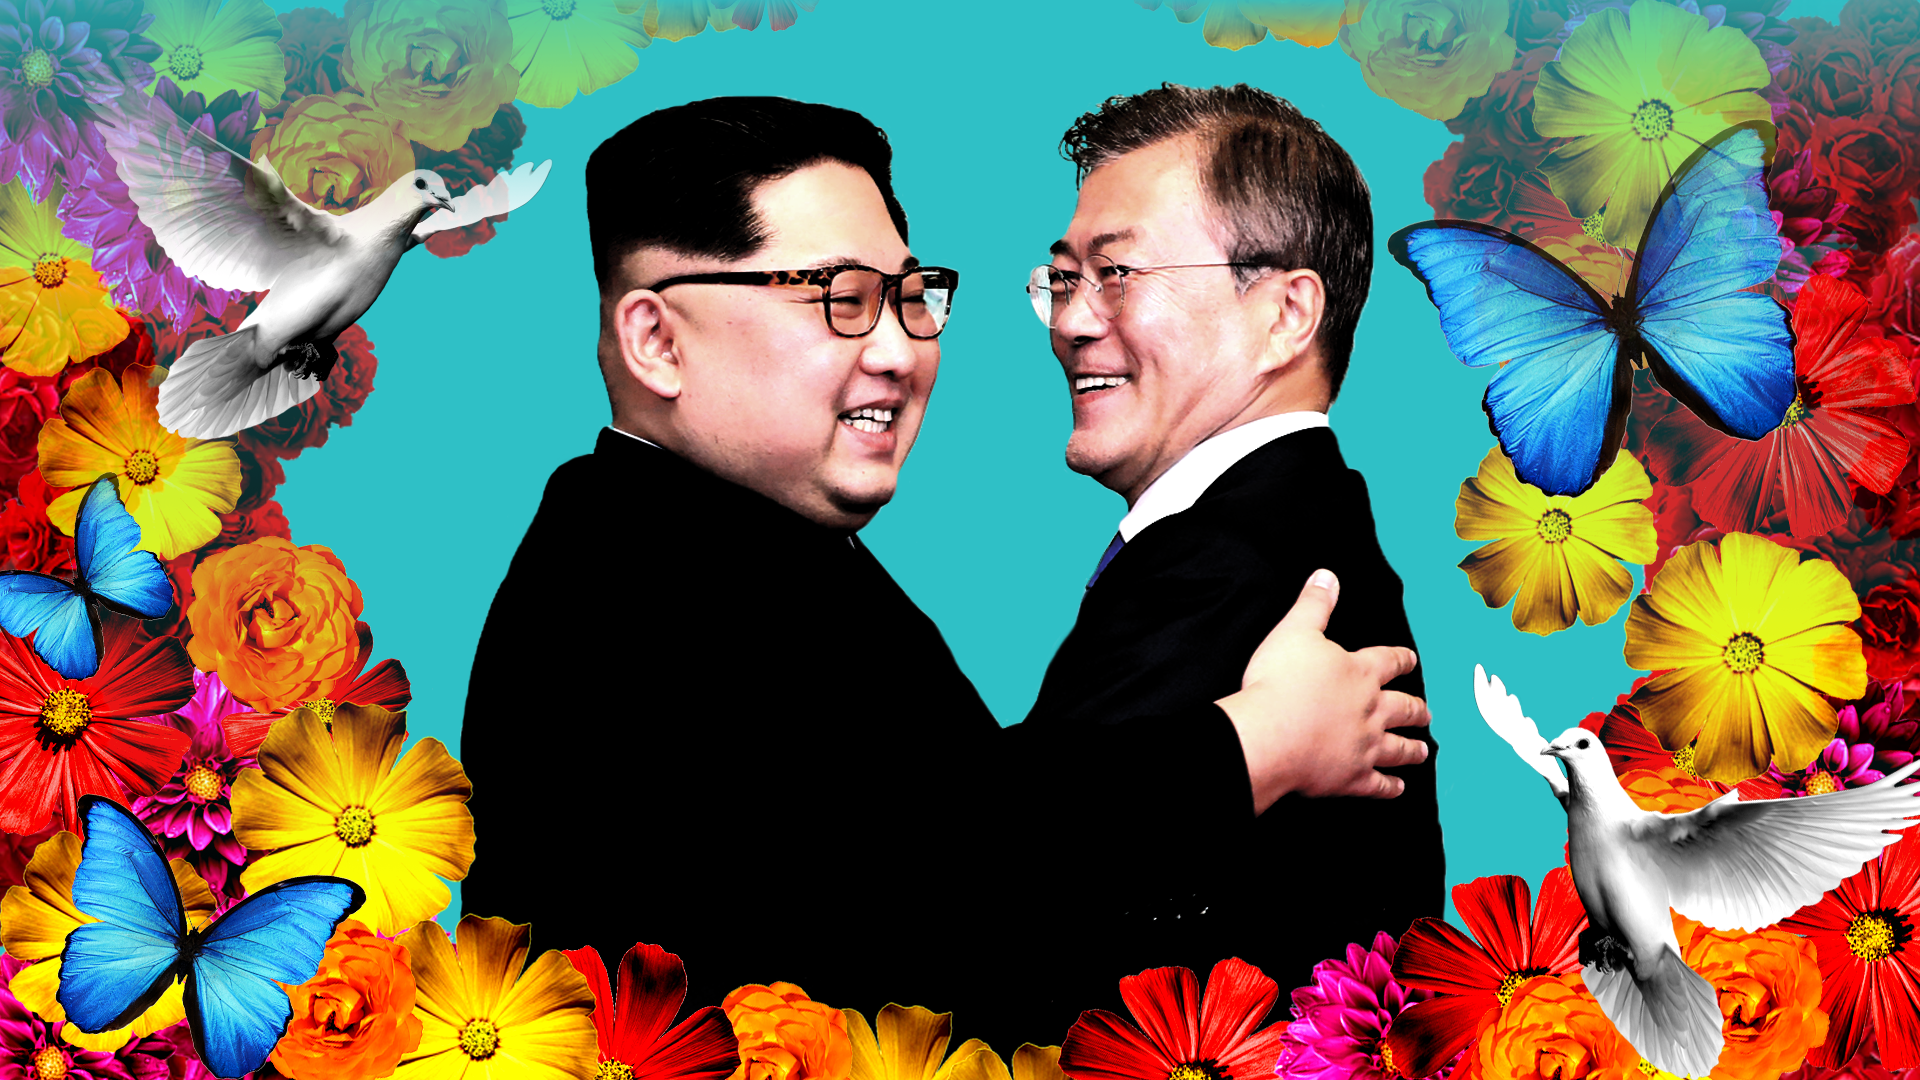 North Korean leader Kim Jong-un and South Korean President Moon Jae-in, with flowers and doves